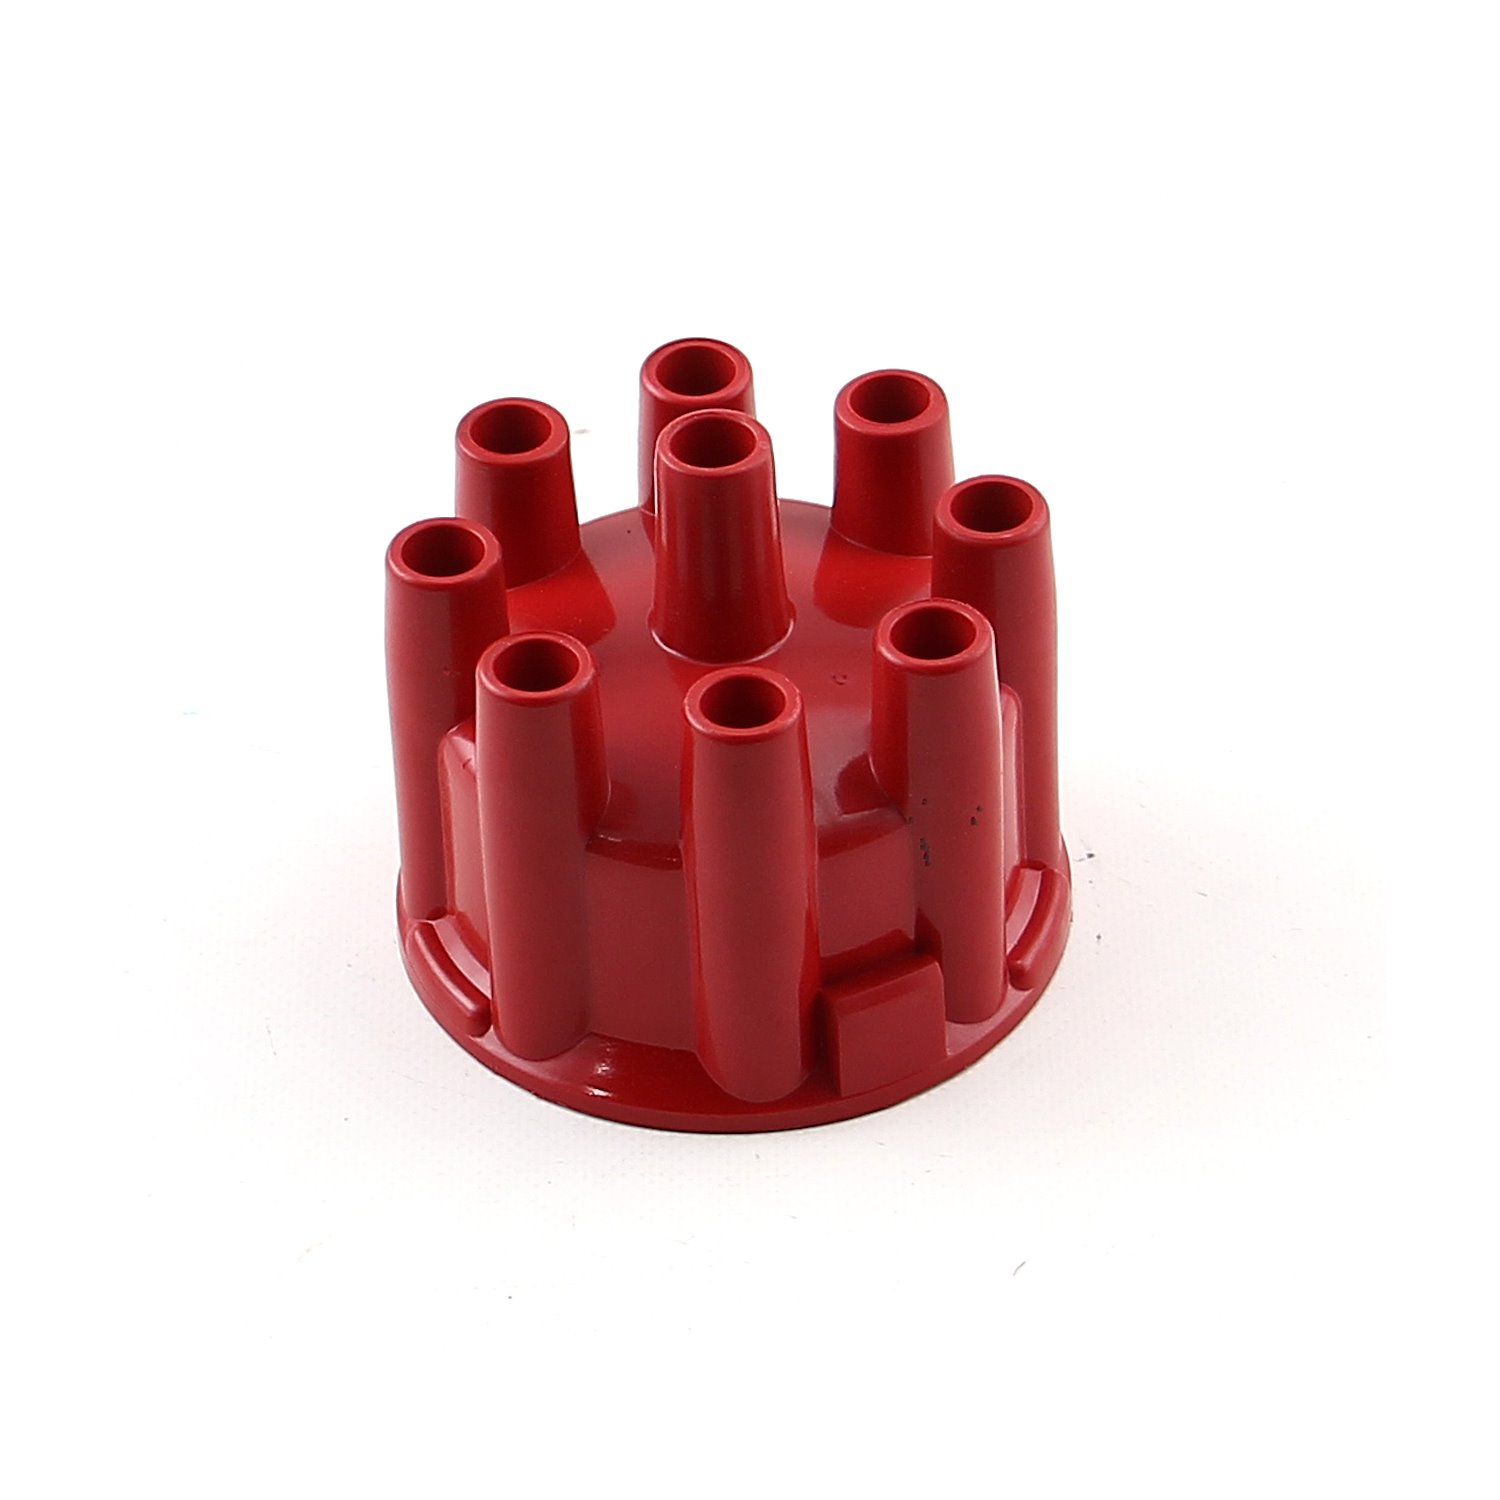 7000 and 8000 Series Female Std Distributor Cap - Red